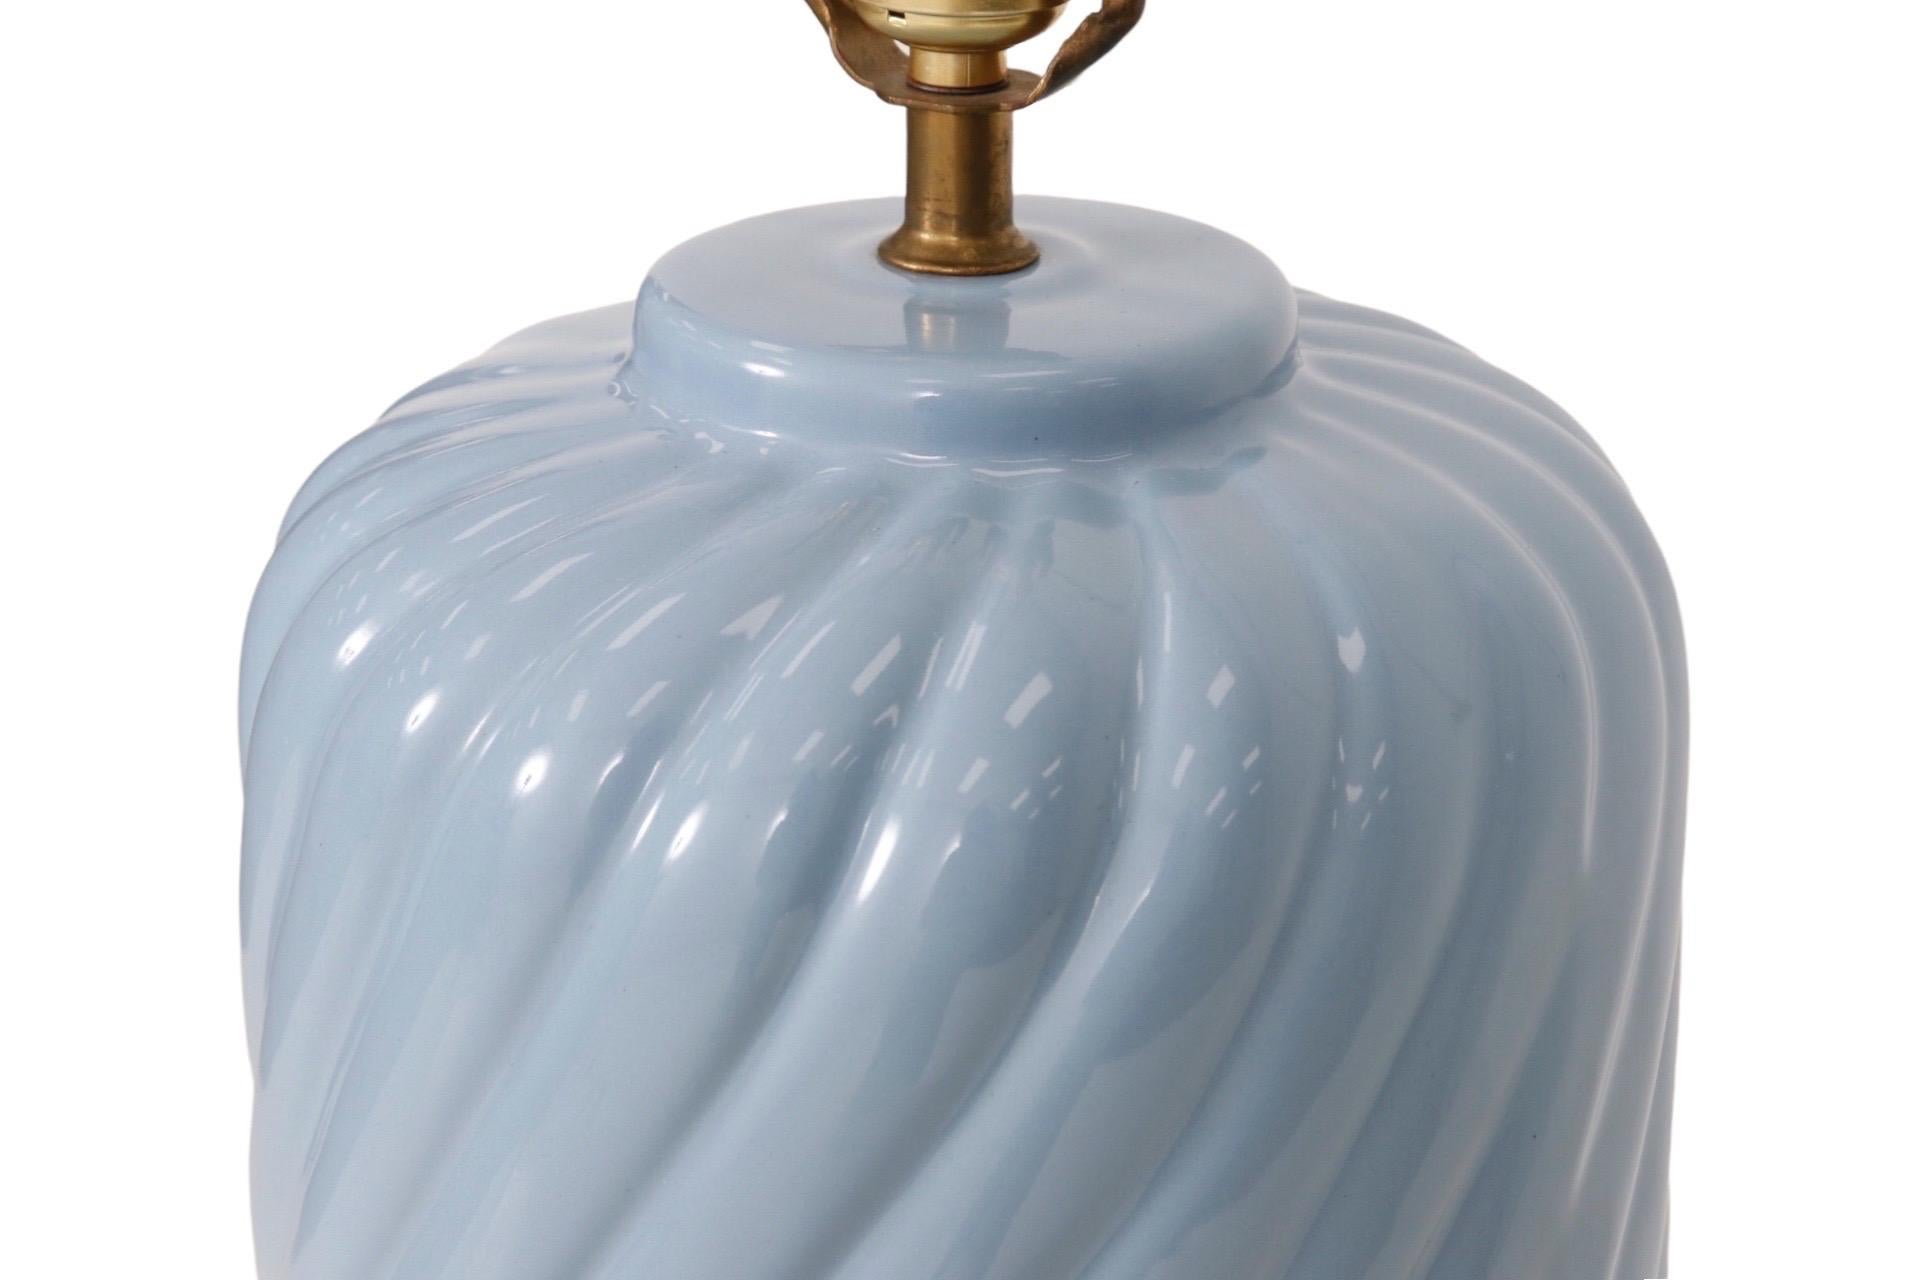 A cylindrical ceramic table lamp in periwinkle blue. Bevelled lines swirl diagonally around the body of the lamp. The central column and harp holder are brass.
  